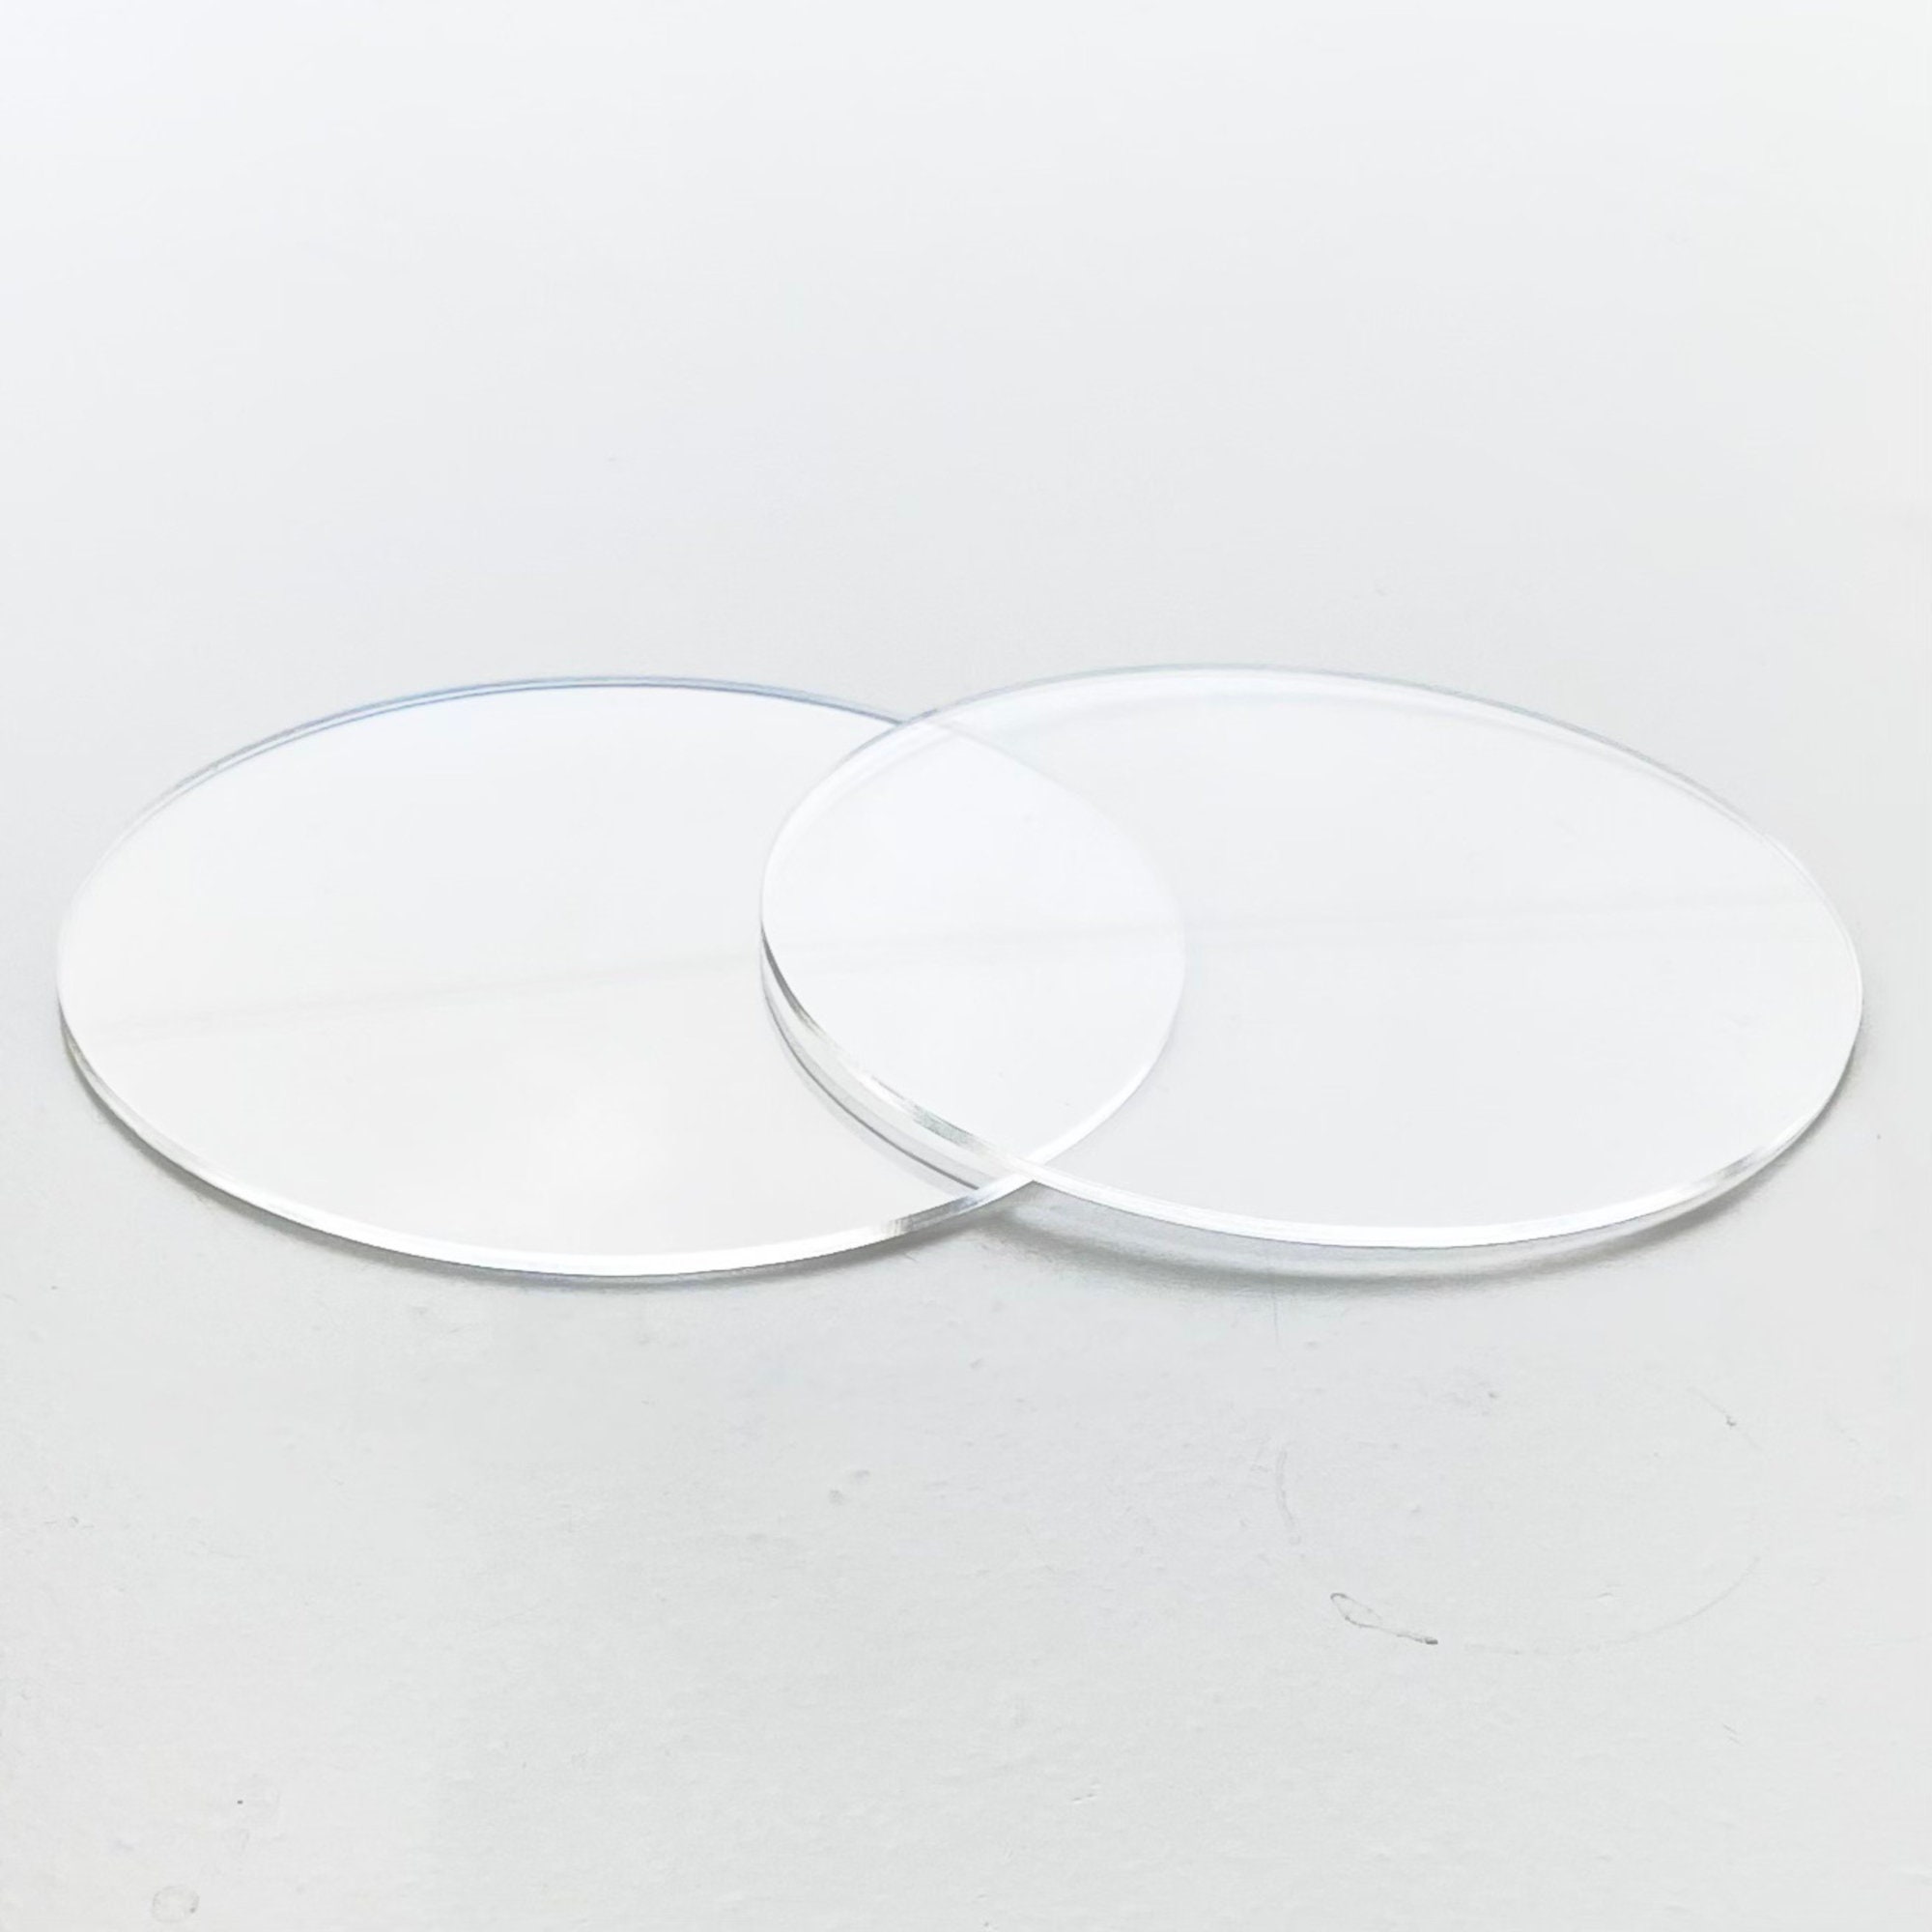 ONE Laser Cut Clear Acrylic Blank Round Disc: Smooth Edge Transparent Plexiglass  Circle 1/4 inch (6 mm) thick